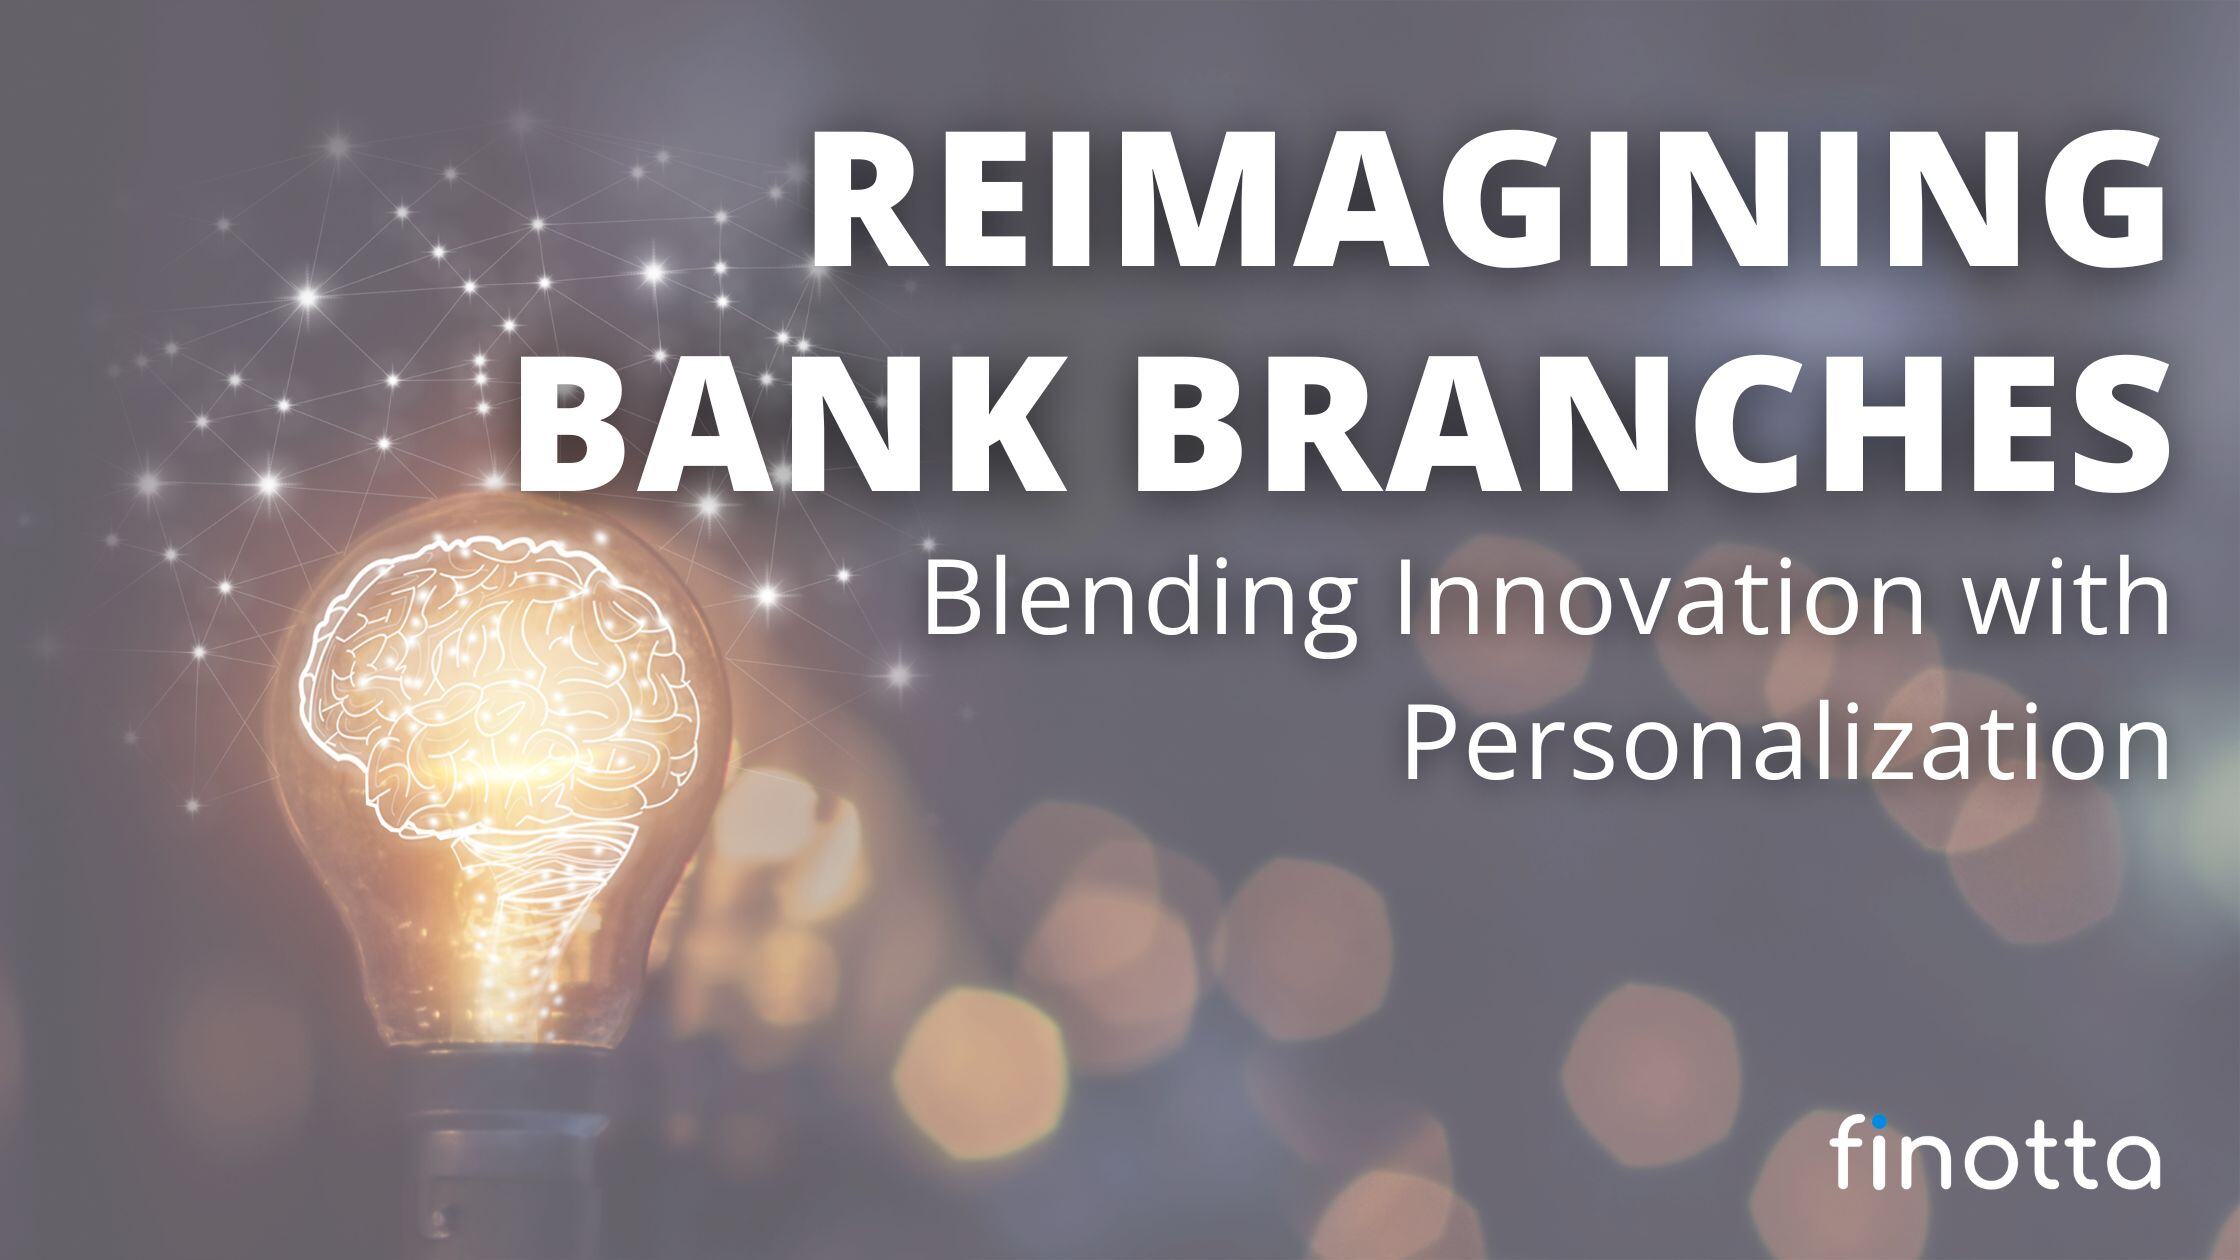 Reimagining Bank Branches: Blending Innovation with Personalization